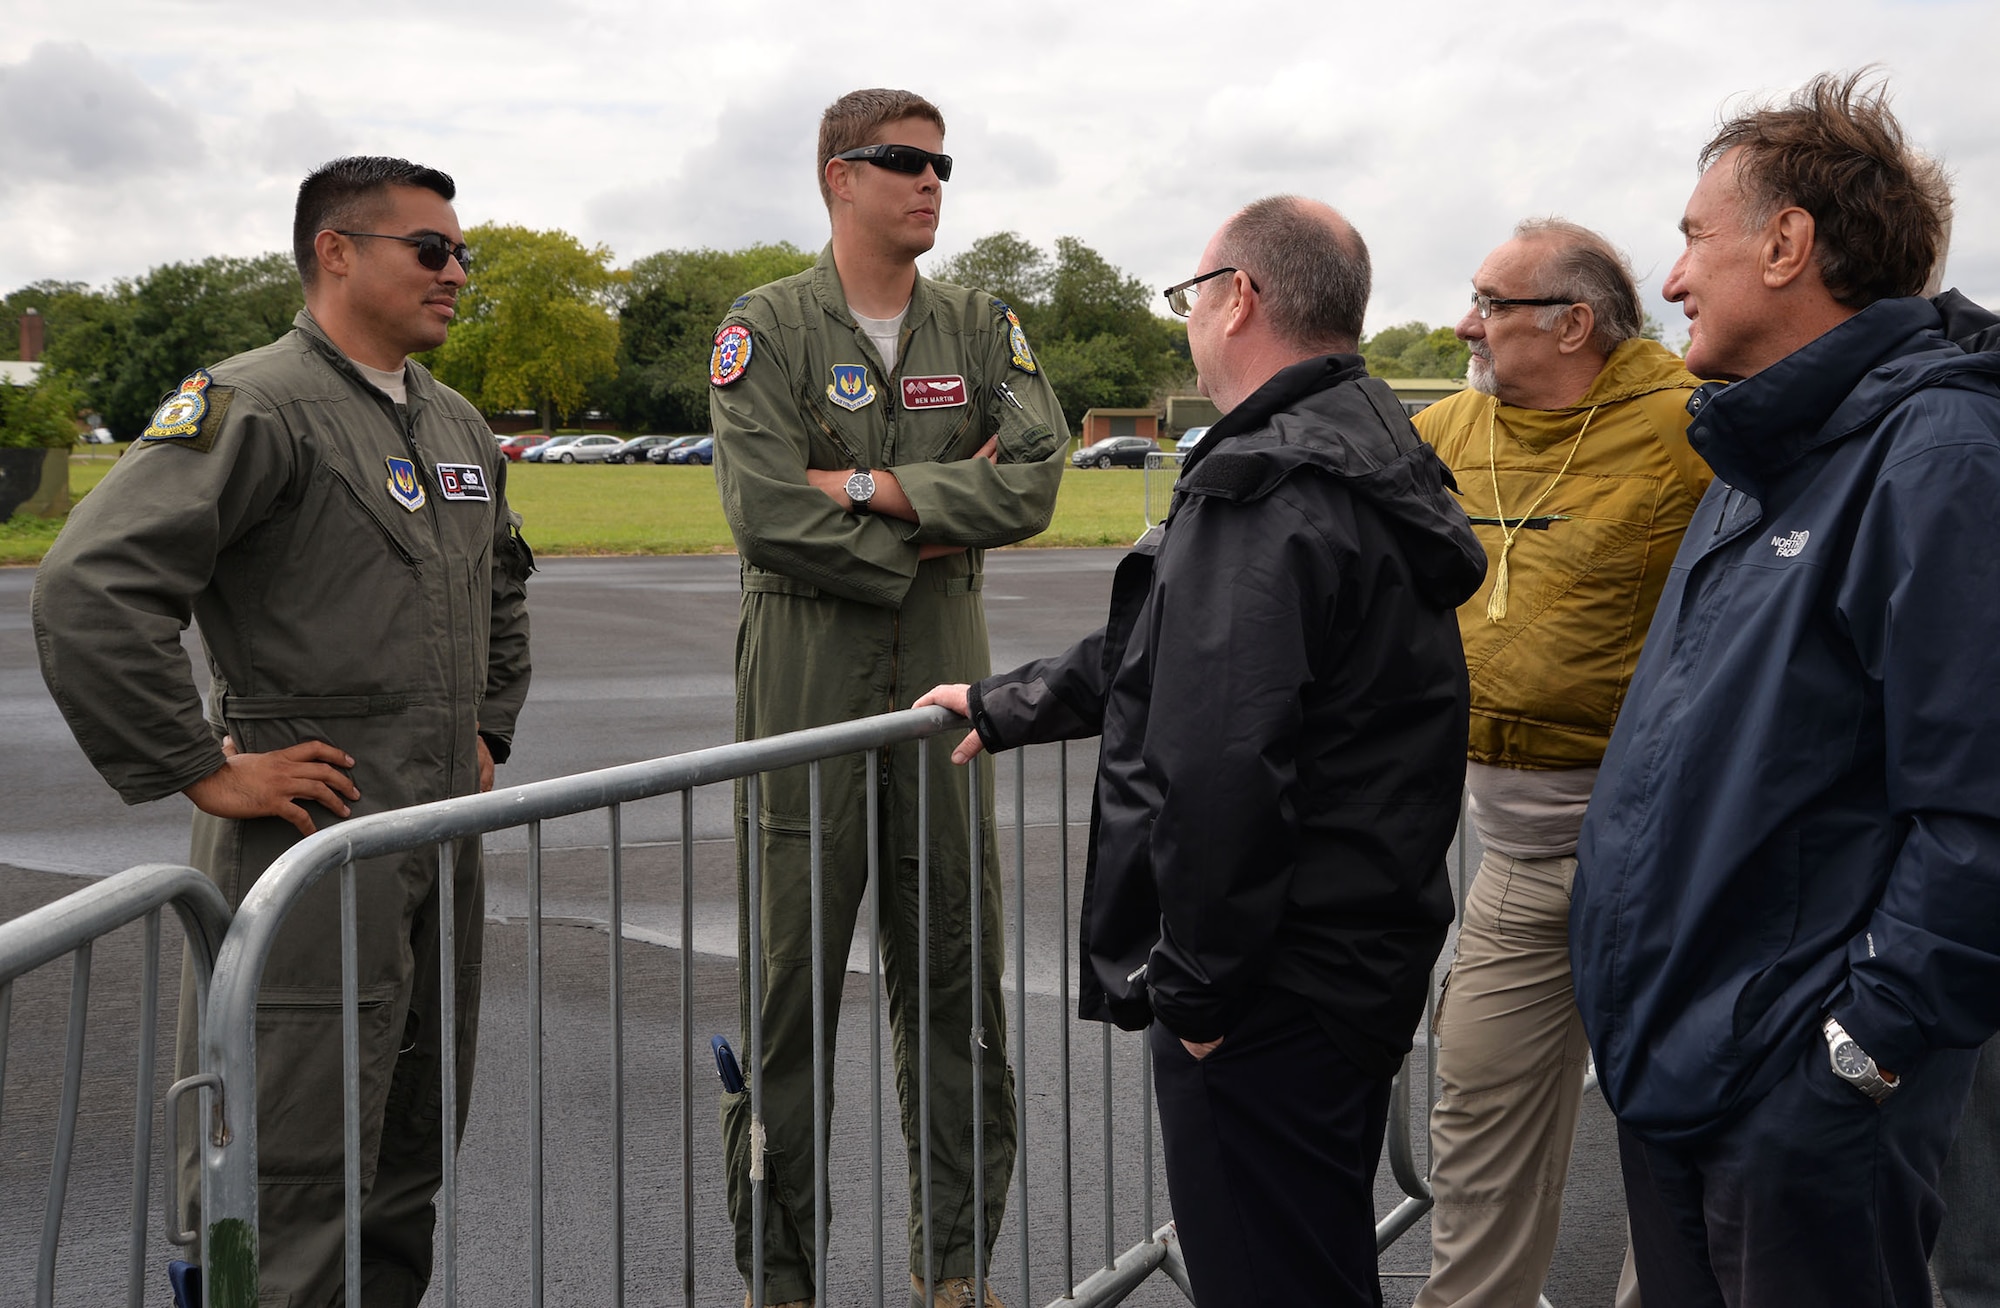 U.S. Air Force Staff Sgt. Ernesto Riojas, left, 100th Aircraft Maintenance Squadron flying crew chief, and U.S. Air Force Capt. Ben Martin, 100th Operations Group KC-135 Stratotankerpilot, talk to members of the crowd at the RAF Marham Friends and Families Day event July 20, 2017, at Marham, England. Team Mildenhall supported the event with static displays of a KC-135 Stratotanker and a CV-22 Osprey. (U.S. Air Force photo by Karen Abeyasekere)